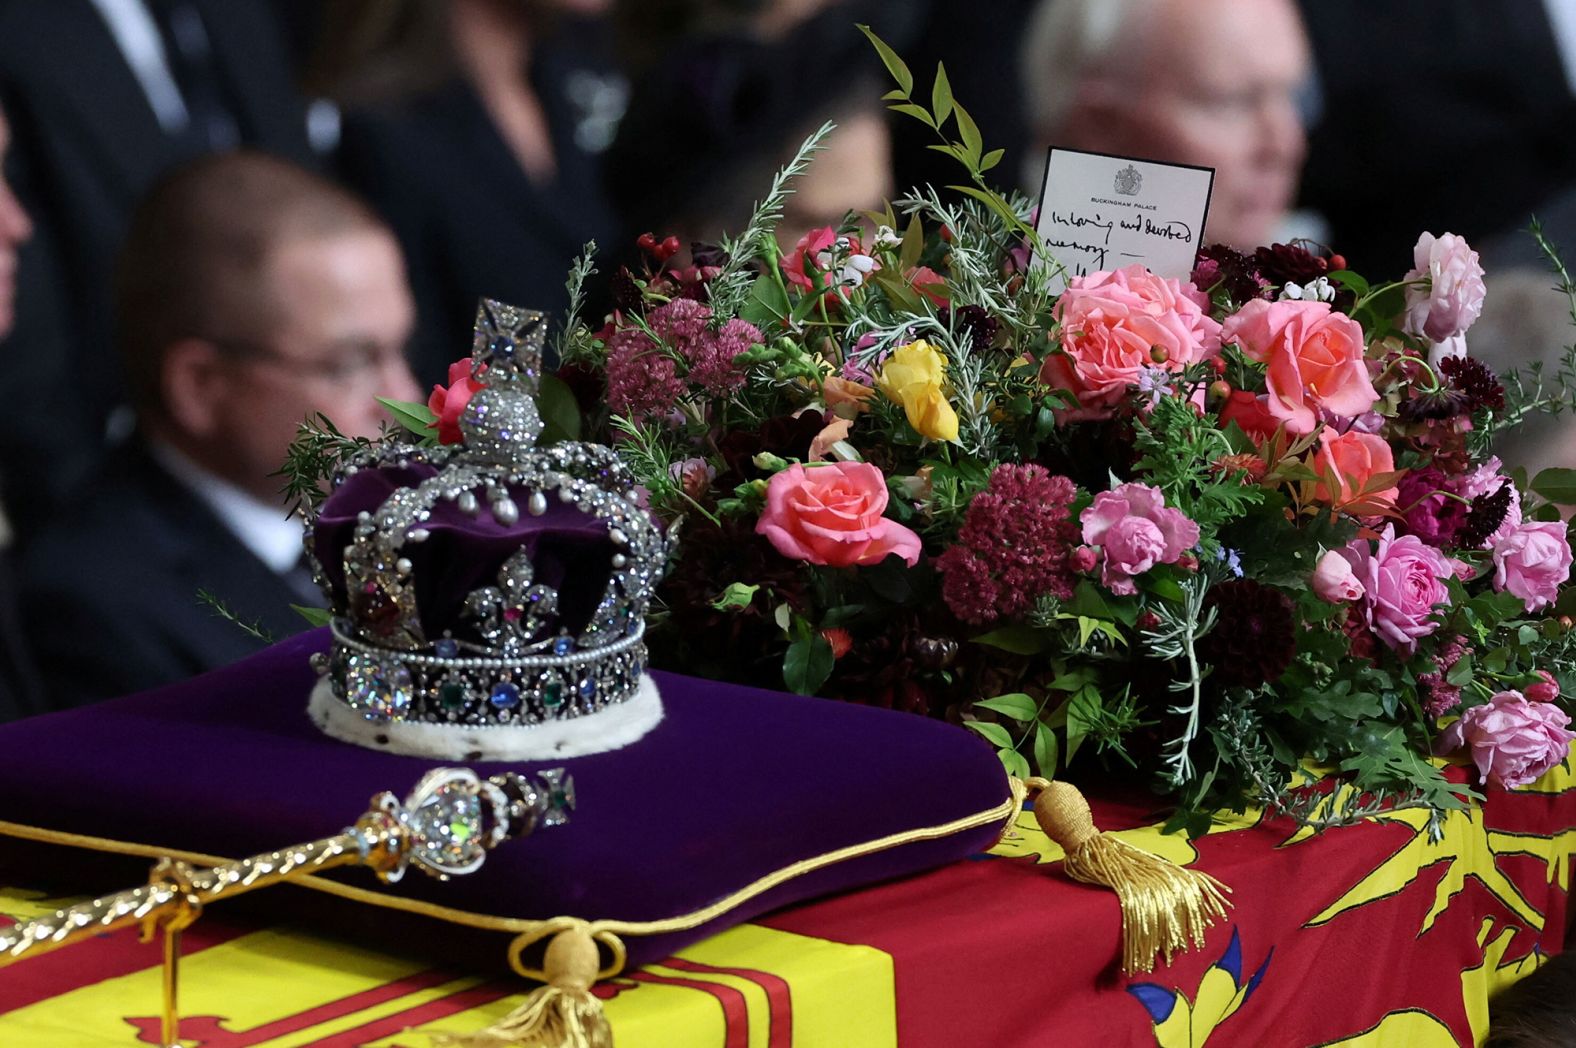 <a href="https://www.cnn.com/2022/09/19/europe/queen-funeral-coffin-note-charles-gbr-intl-scli/index.html" target="_blank">A handwritten card</a> placed on top of the Queen's coffin reads, "In loving and devoted memory. Charles R." The "R" in King Charles' title refers to "Rex," which is Latin for king.